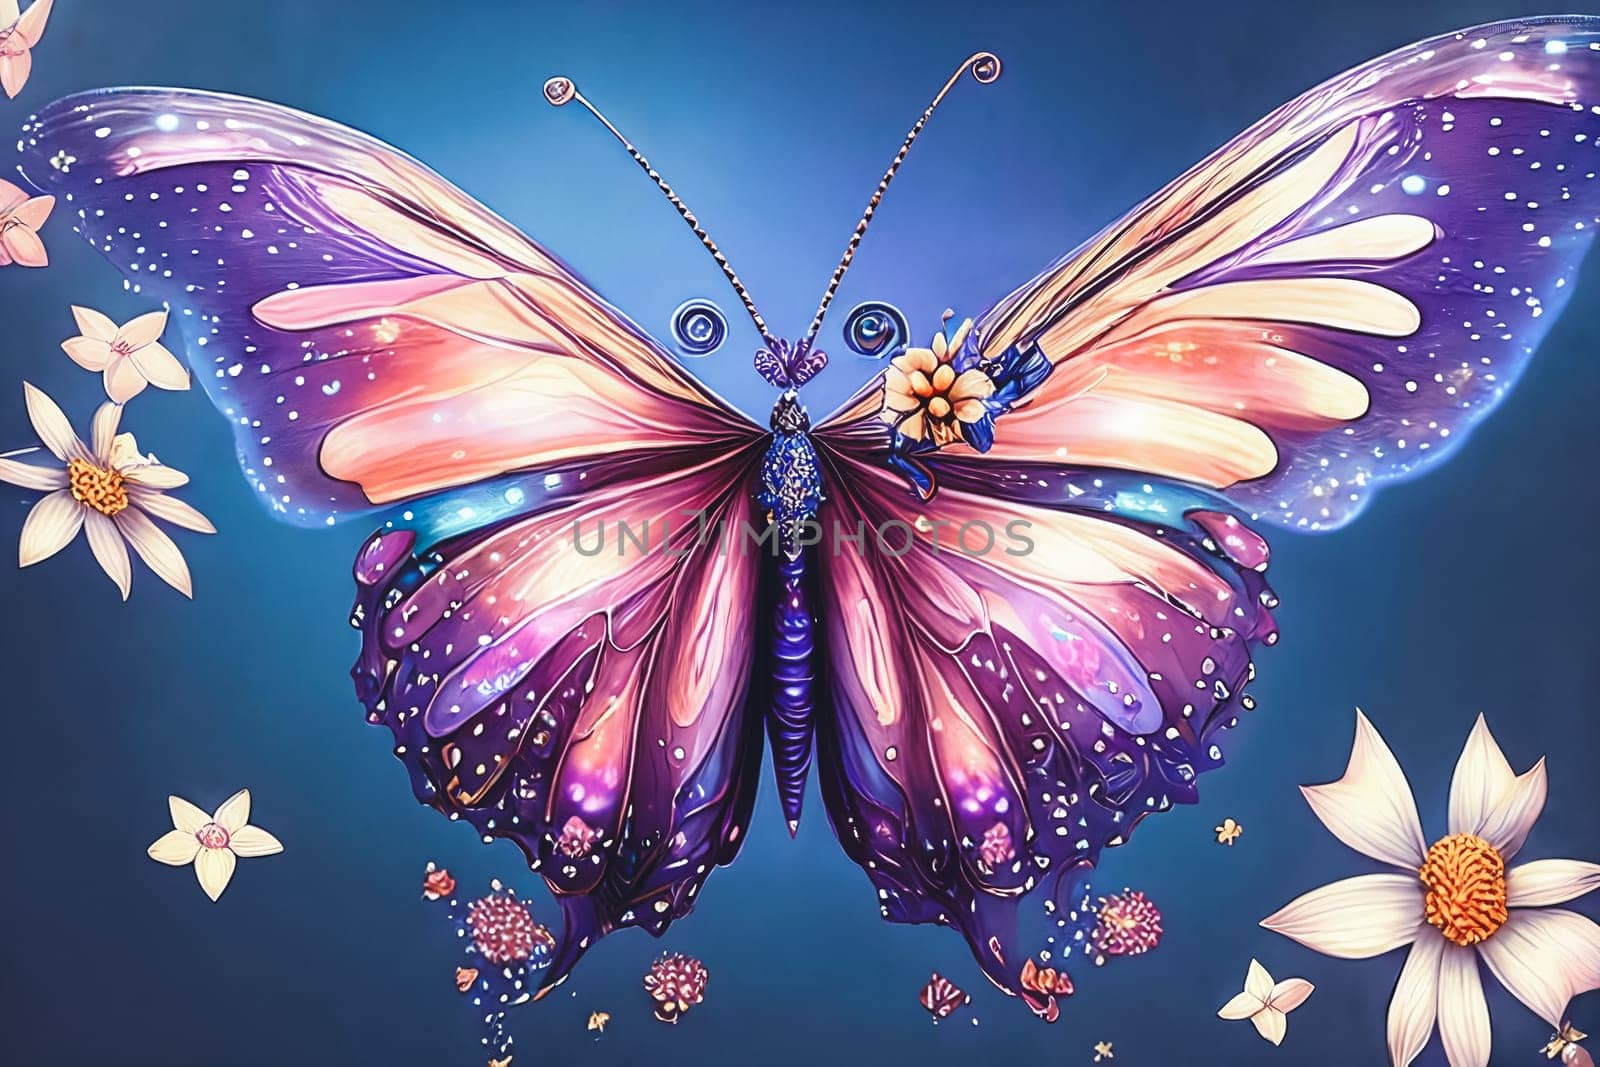 A mystical fantasy butterfly with shimmering wings fluttering delicately among blooming celestial flowers and twinkling stars.